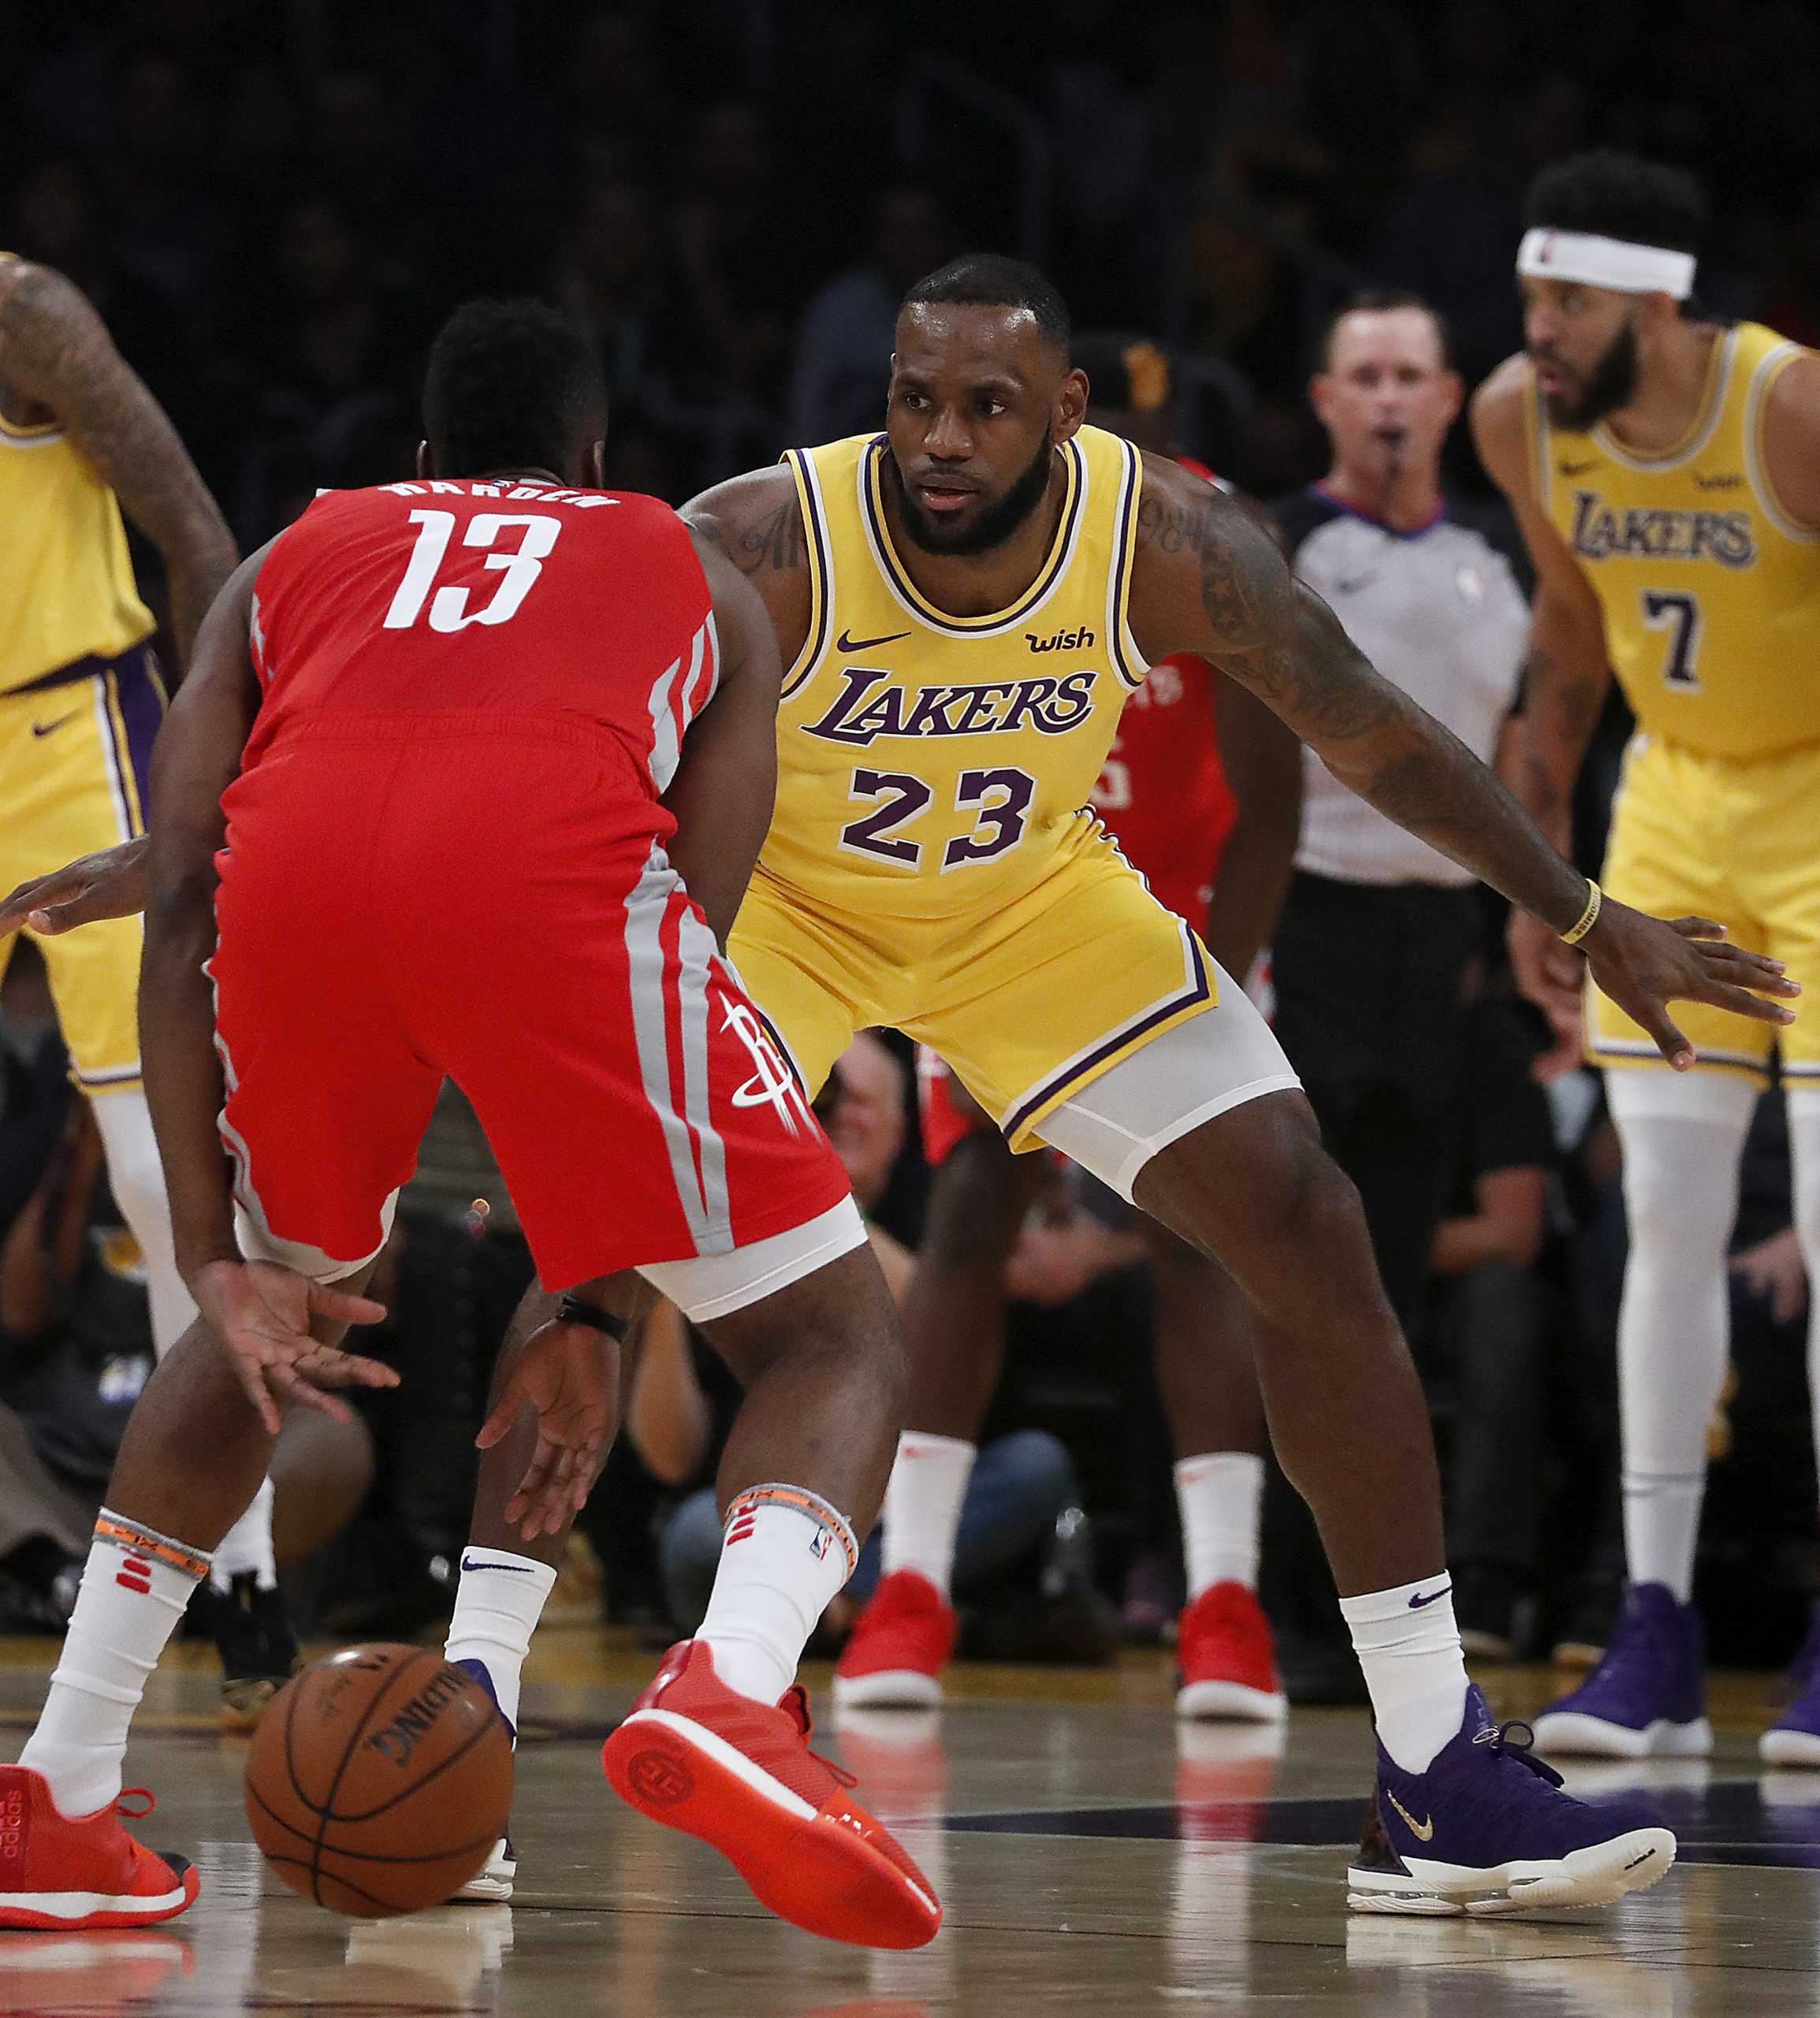 The Los Angeles Lakers LeBron James (23) defends against the Houston Rockets James Harden (13) in the first quarter on Saturday, Oct. 20, 2018, at Staples Center in Los Angeles. (Luis Sinco/Los Angeles Times/TNS)